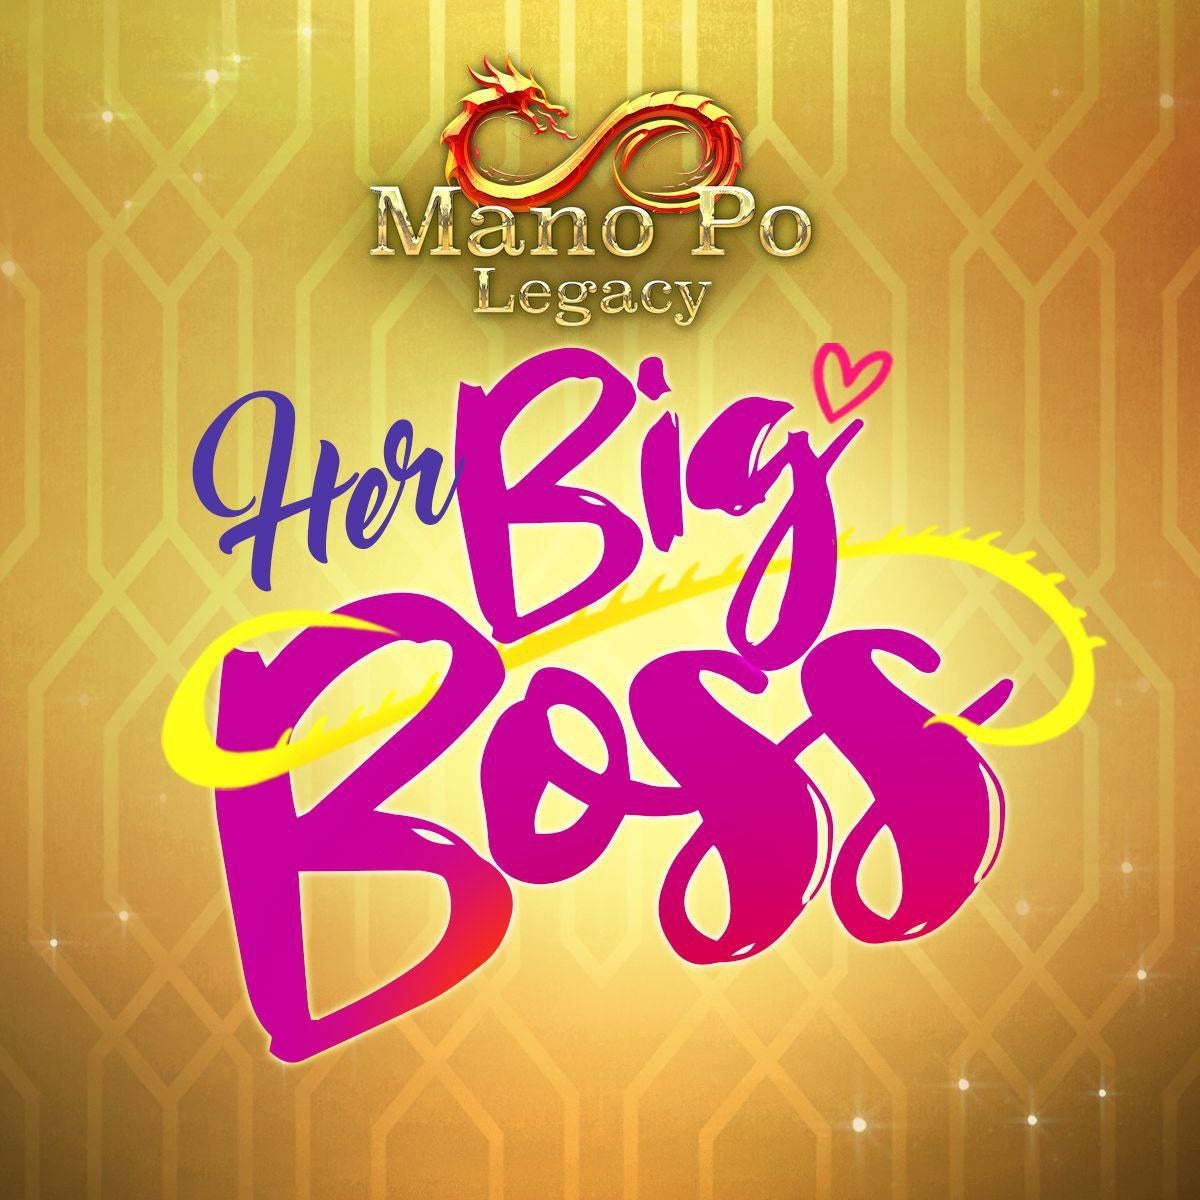 TV ratings for Mano Po Legacy: Her Big Boss in India. GMA TV series